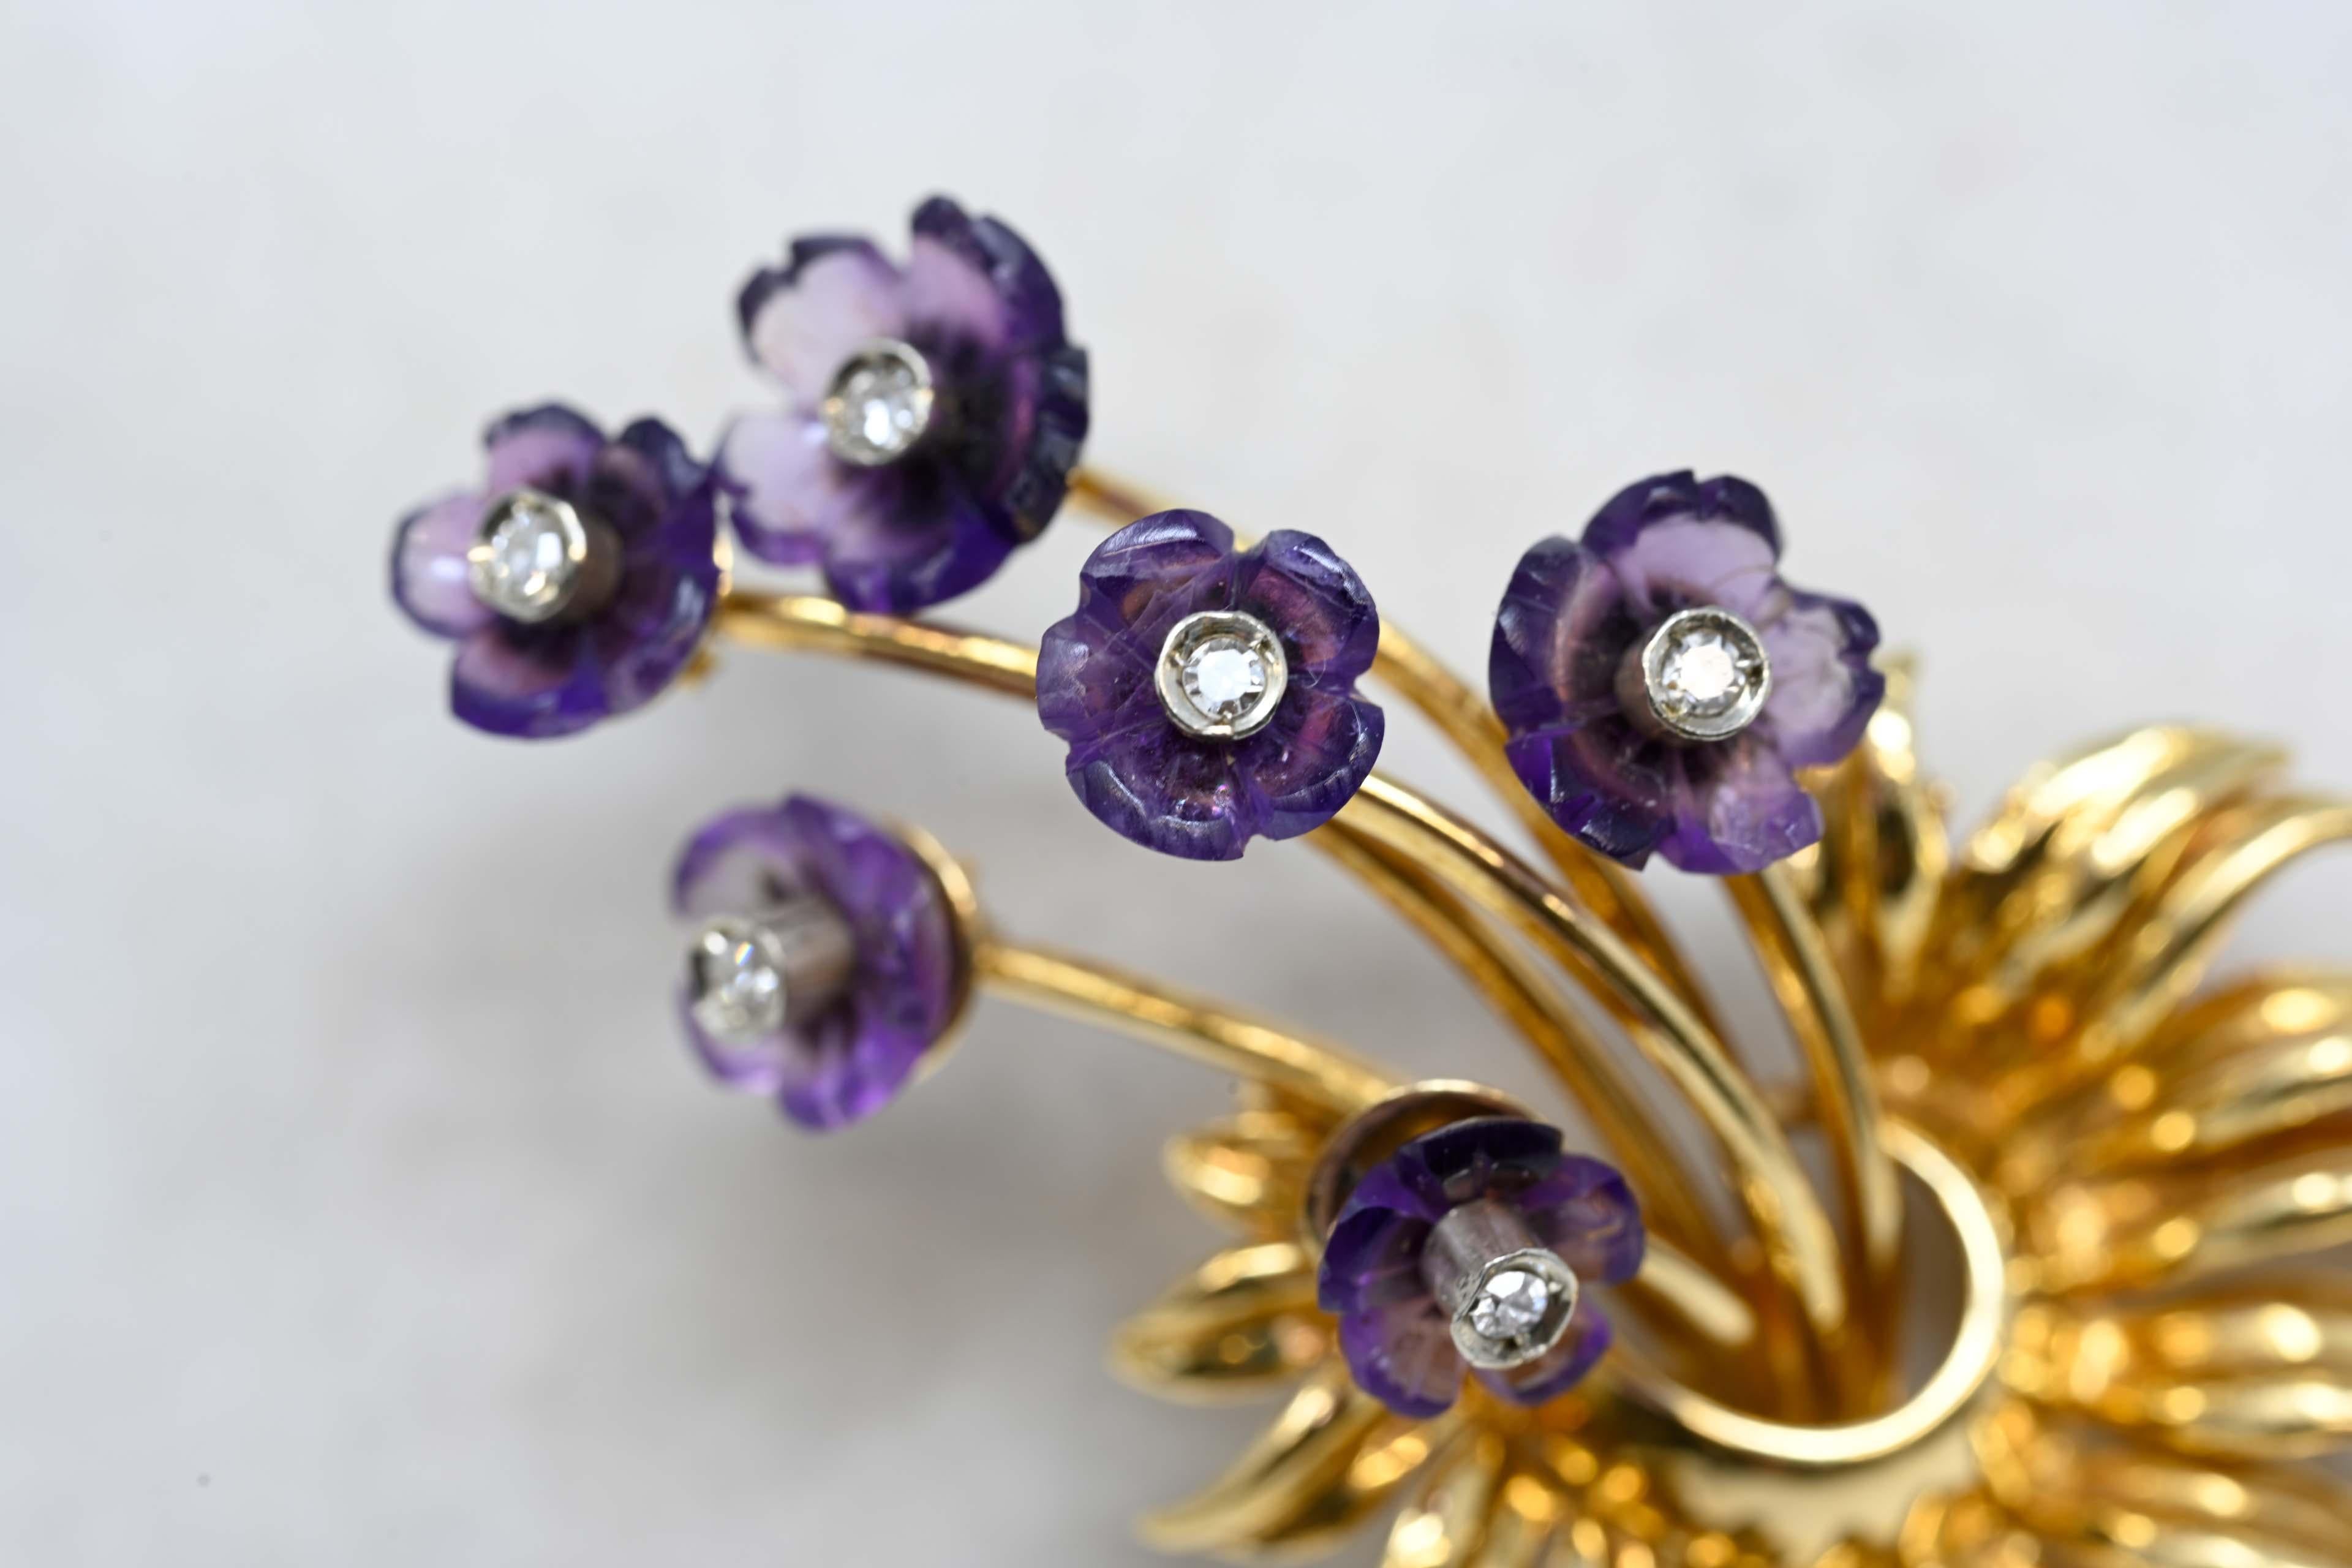 Amethyst and diamond brooch pin designed in 18k yellow gold. Carved amethyst flower with diamonds in the center, each weighing .05ct. The brooch measures 2 inches x 1 1/4 inches and marked on the back. The maker mark is AP, Made in Italy during the